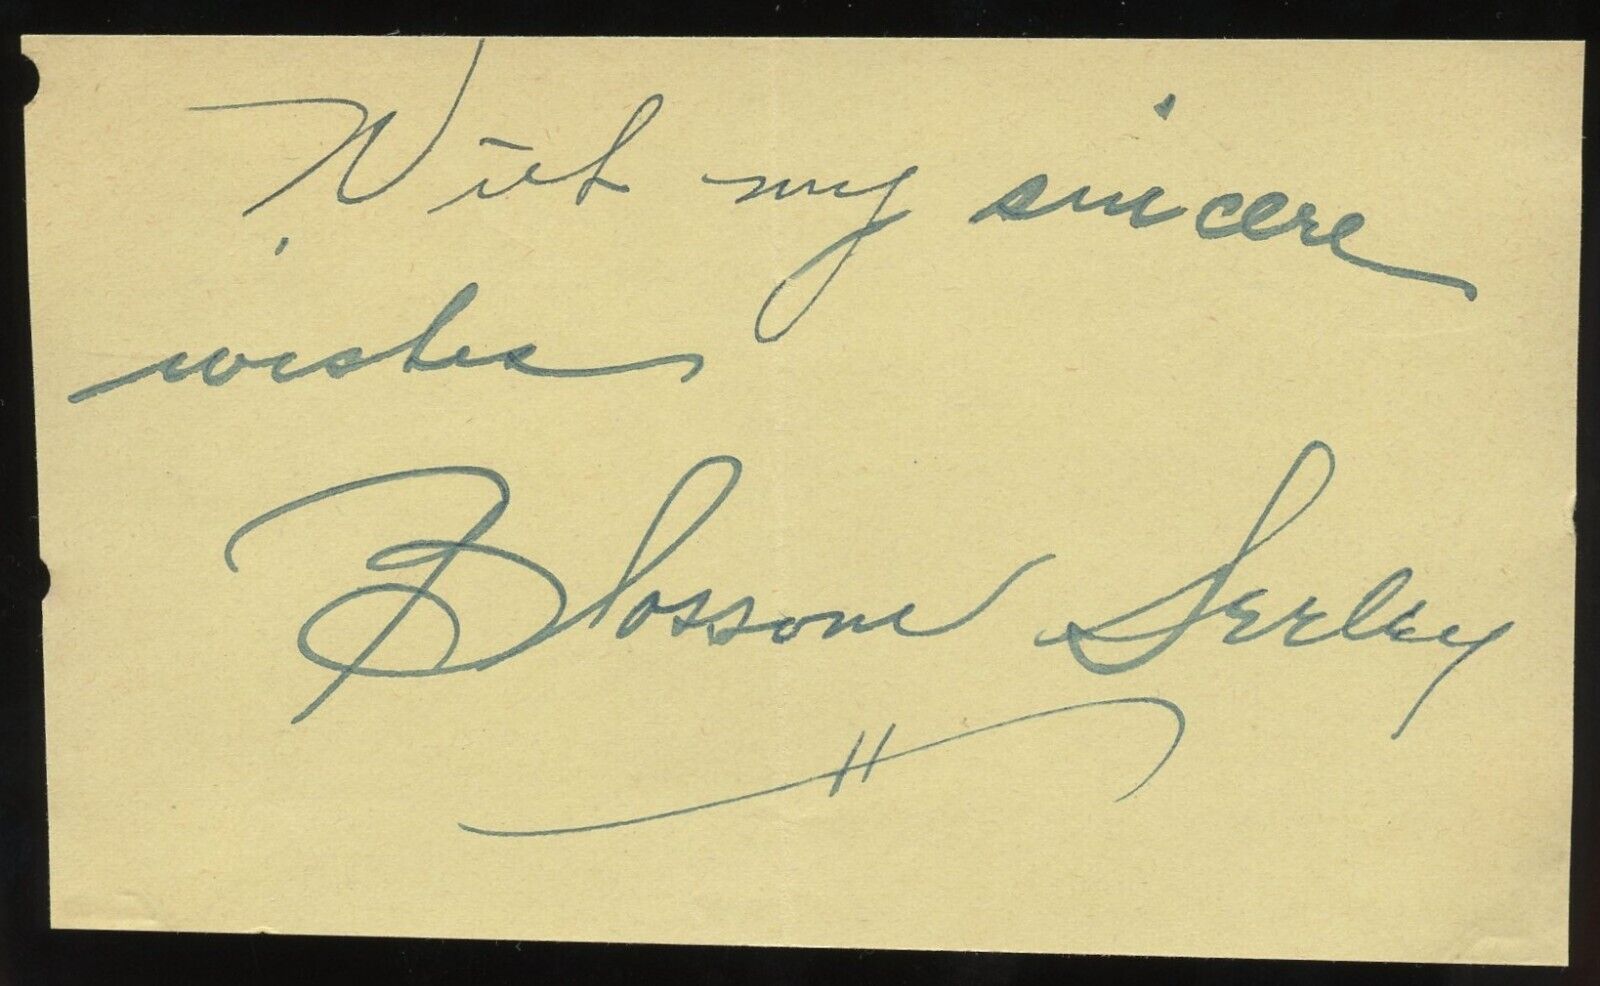 Blossom Seeley d1974 signed autograph 3x5 Cut Actress Singer Jazz Ragtime Music